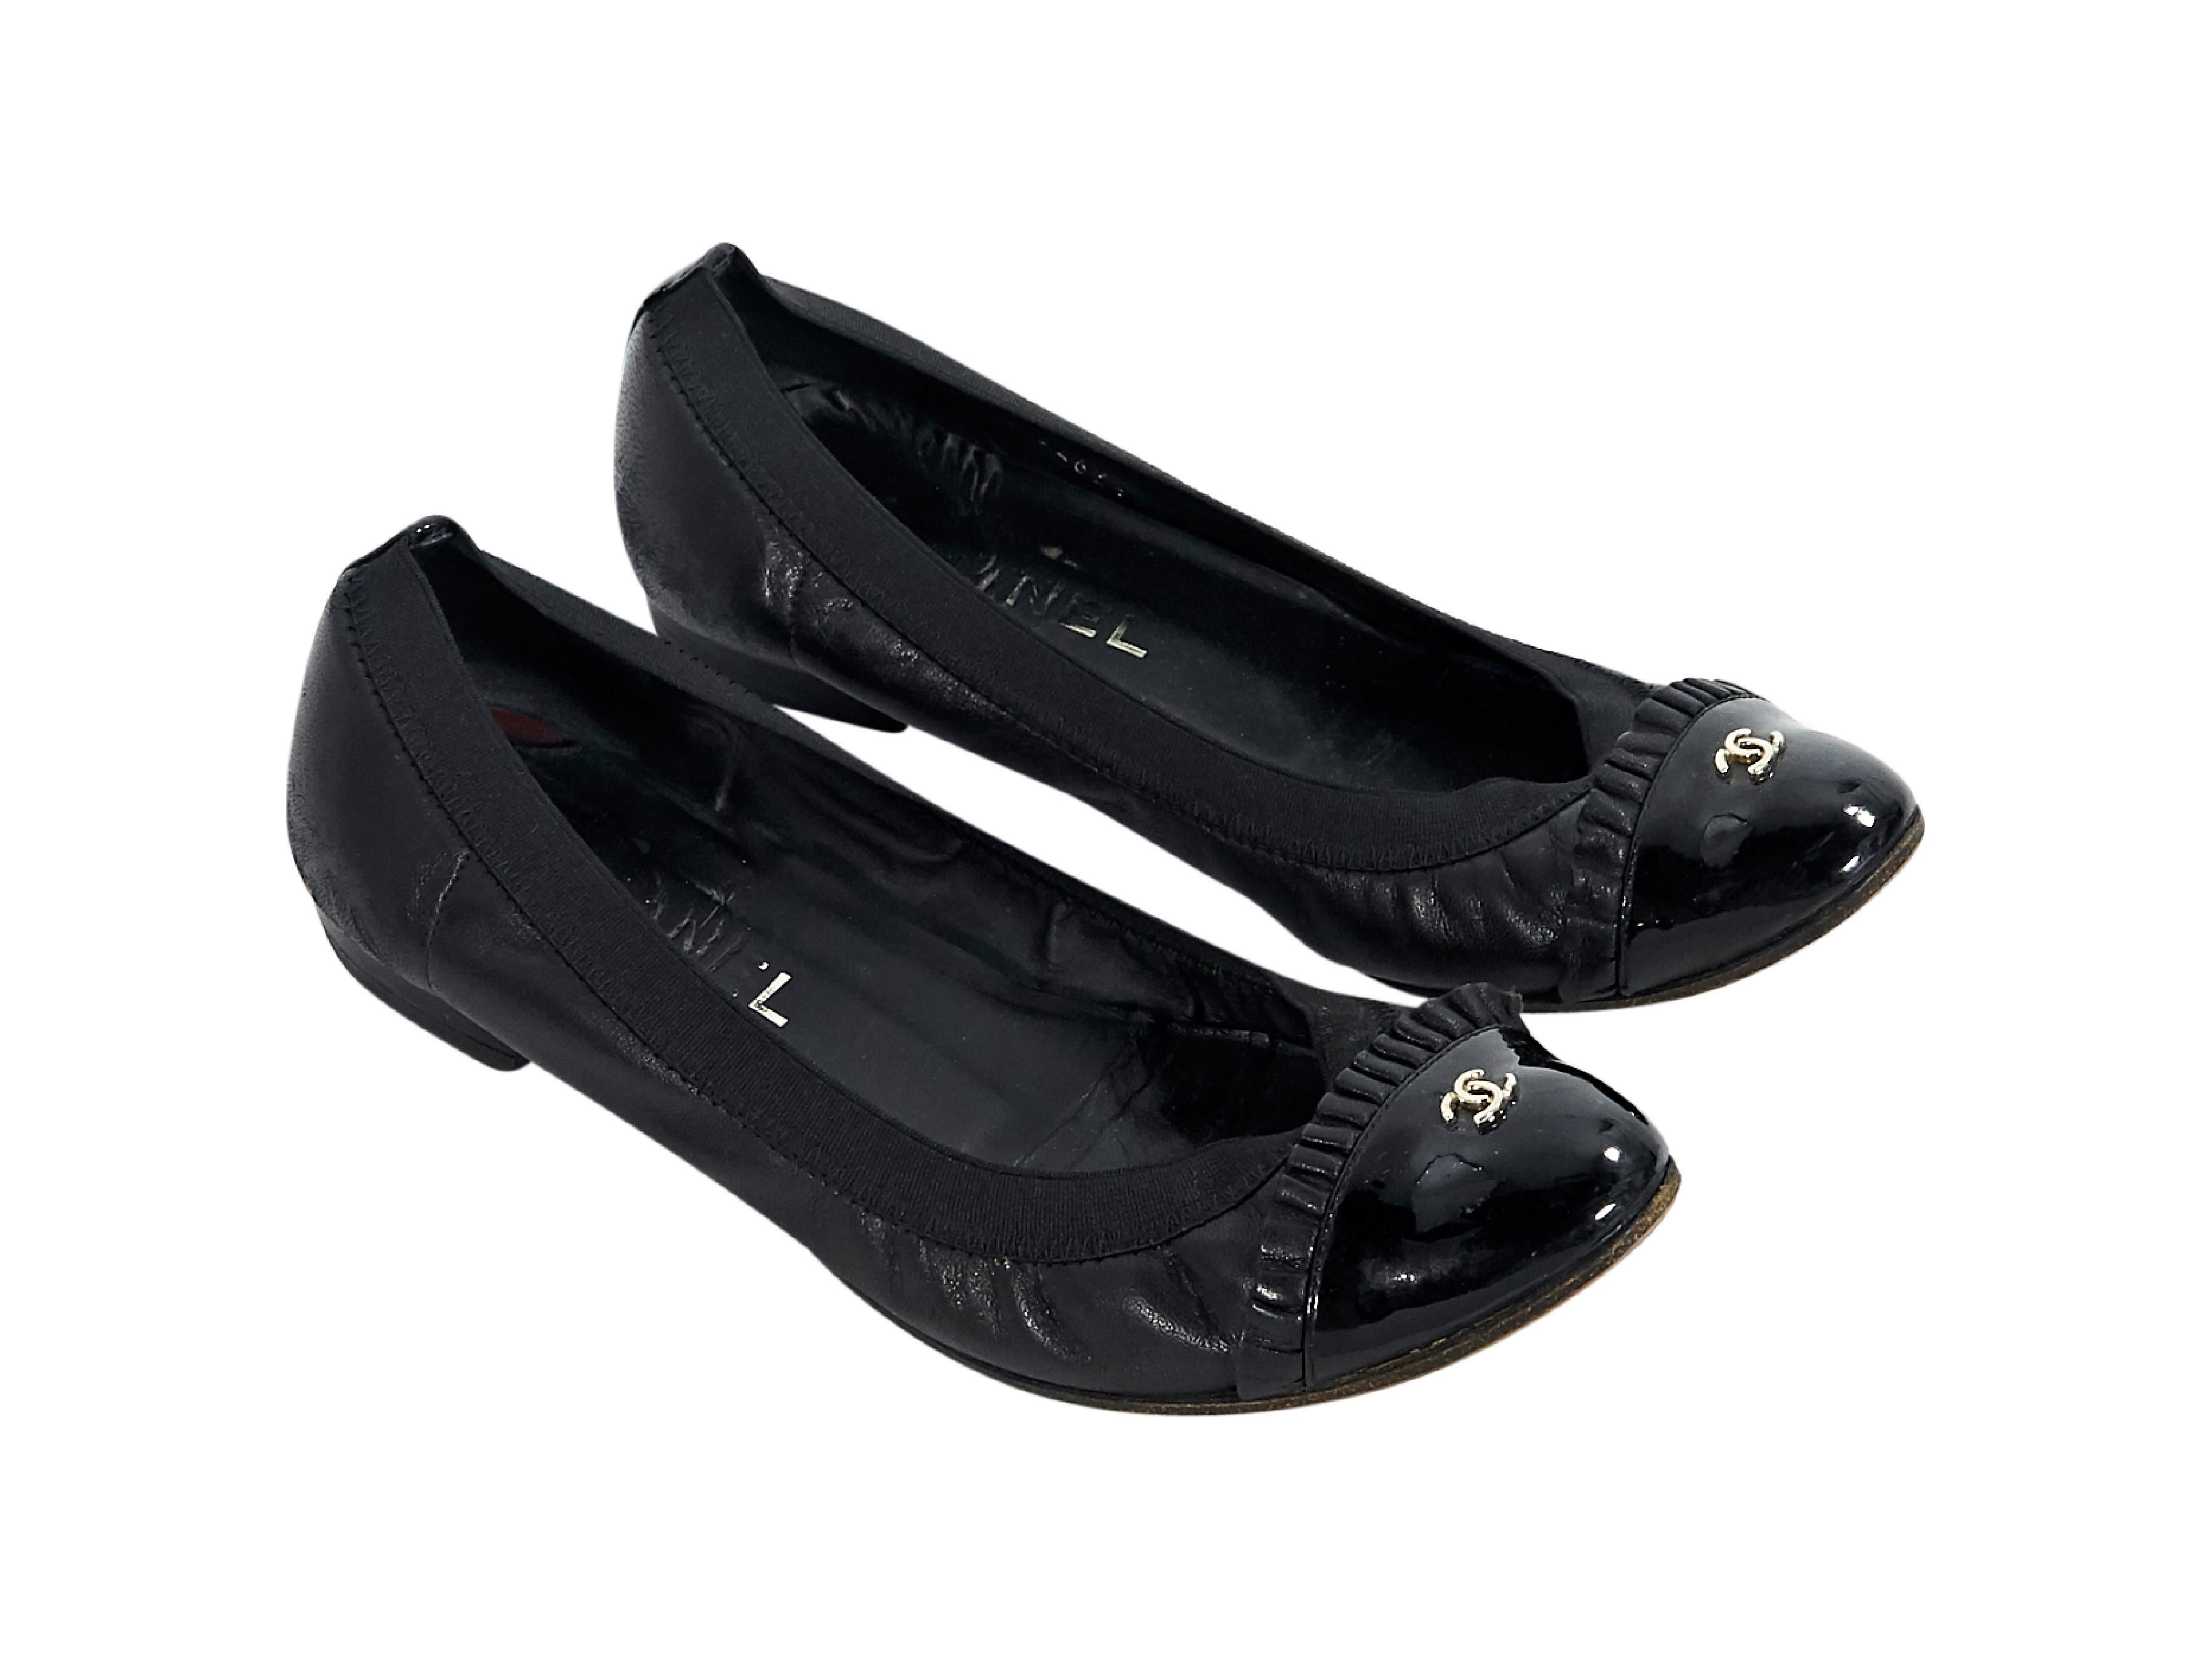 Product details:  Black leather ballet flats by Chanel.  Trimmed with patent leather.  Elasticized topline. Round cap toe with ruffle trim.  Slip-on style.  0.5